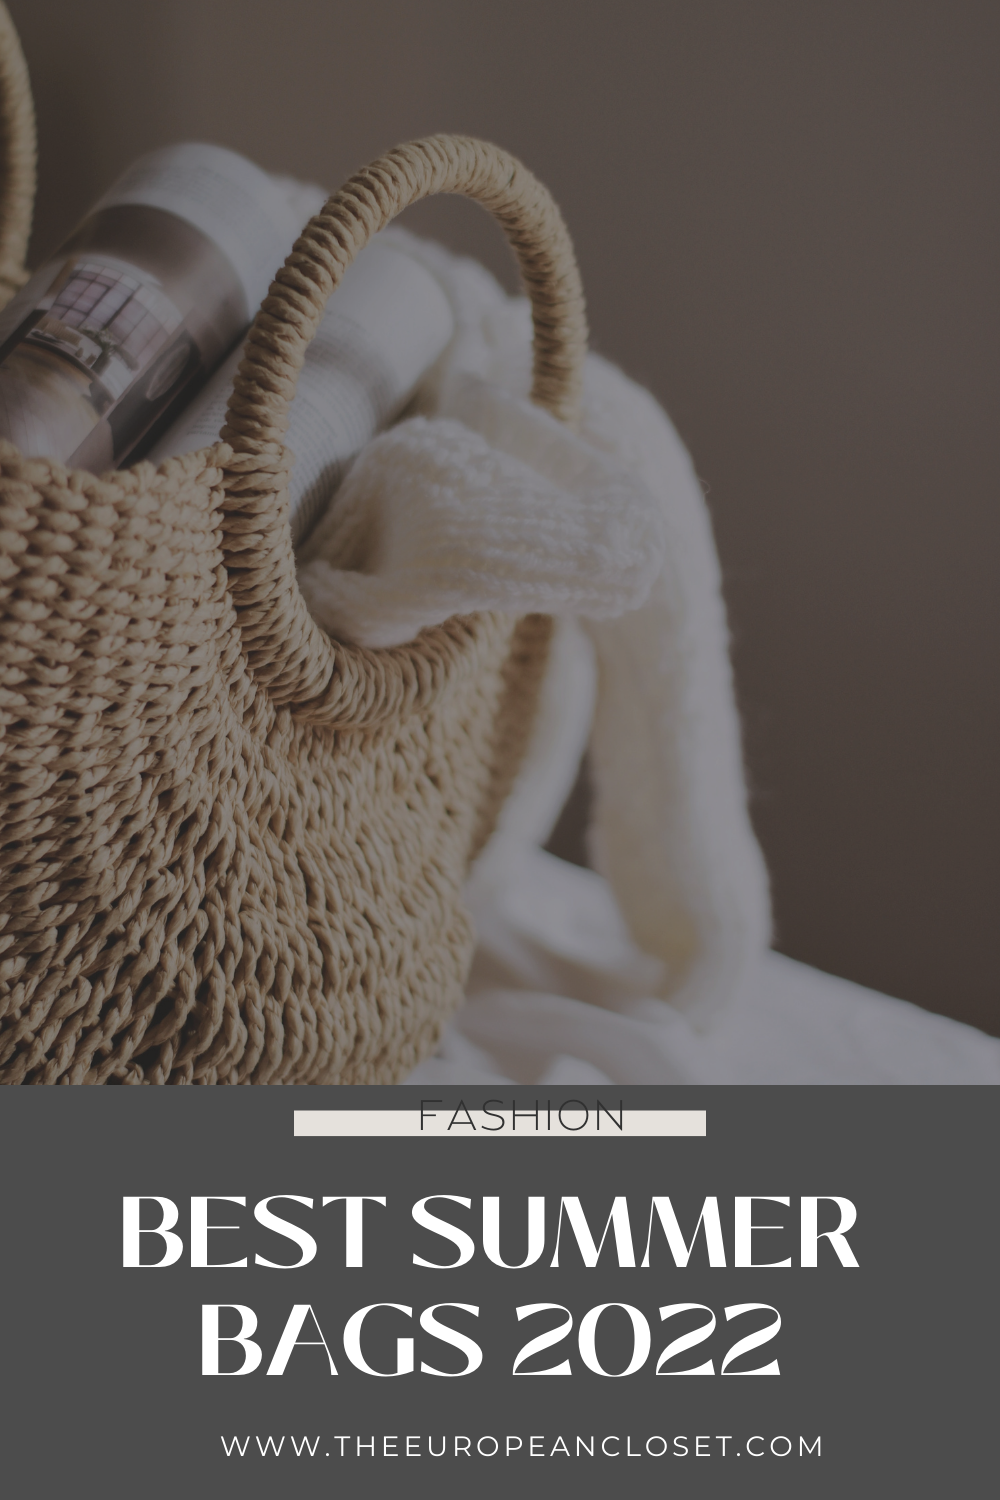 I’ve got you covered if you’re looking for the best Summer bags to give your summer outfits that little upgrade they need. I’ve selected a few summer bags I think you’ll love to have in your wardrobe for this Summer.